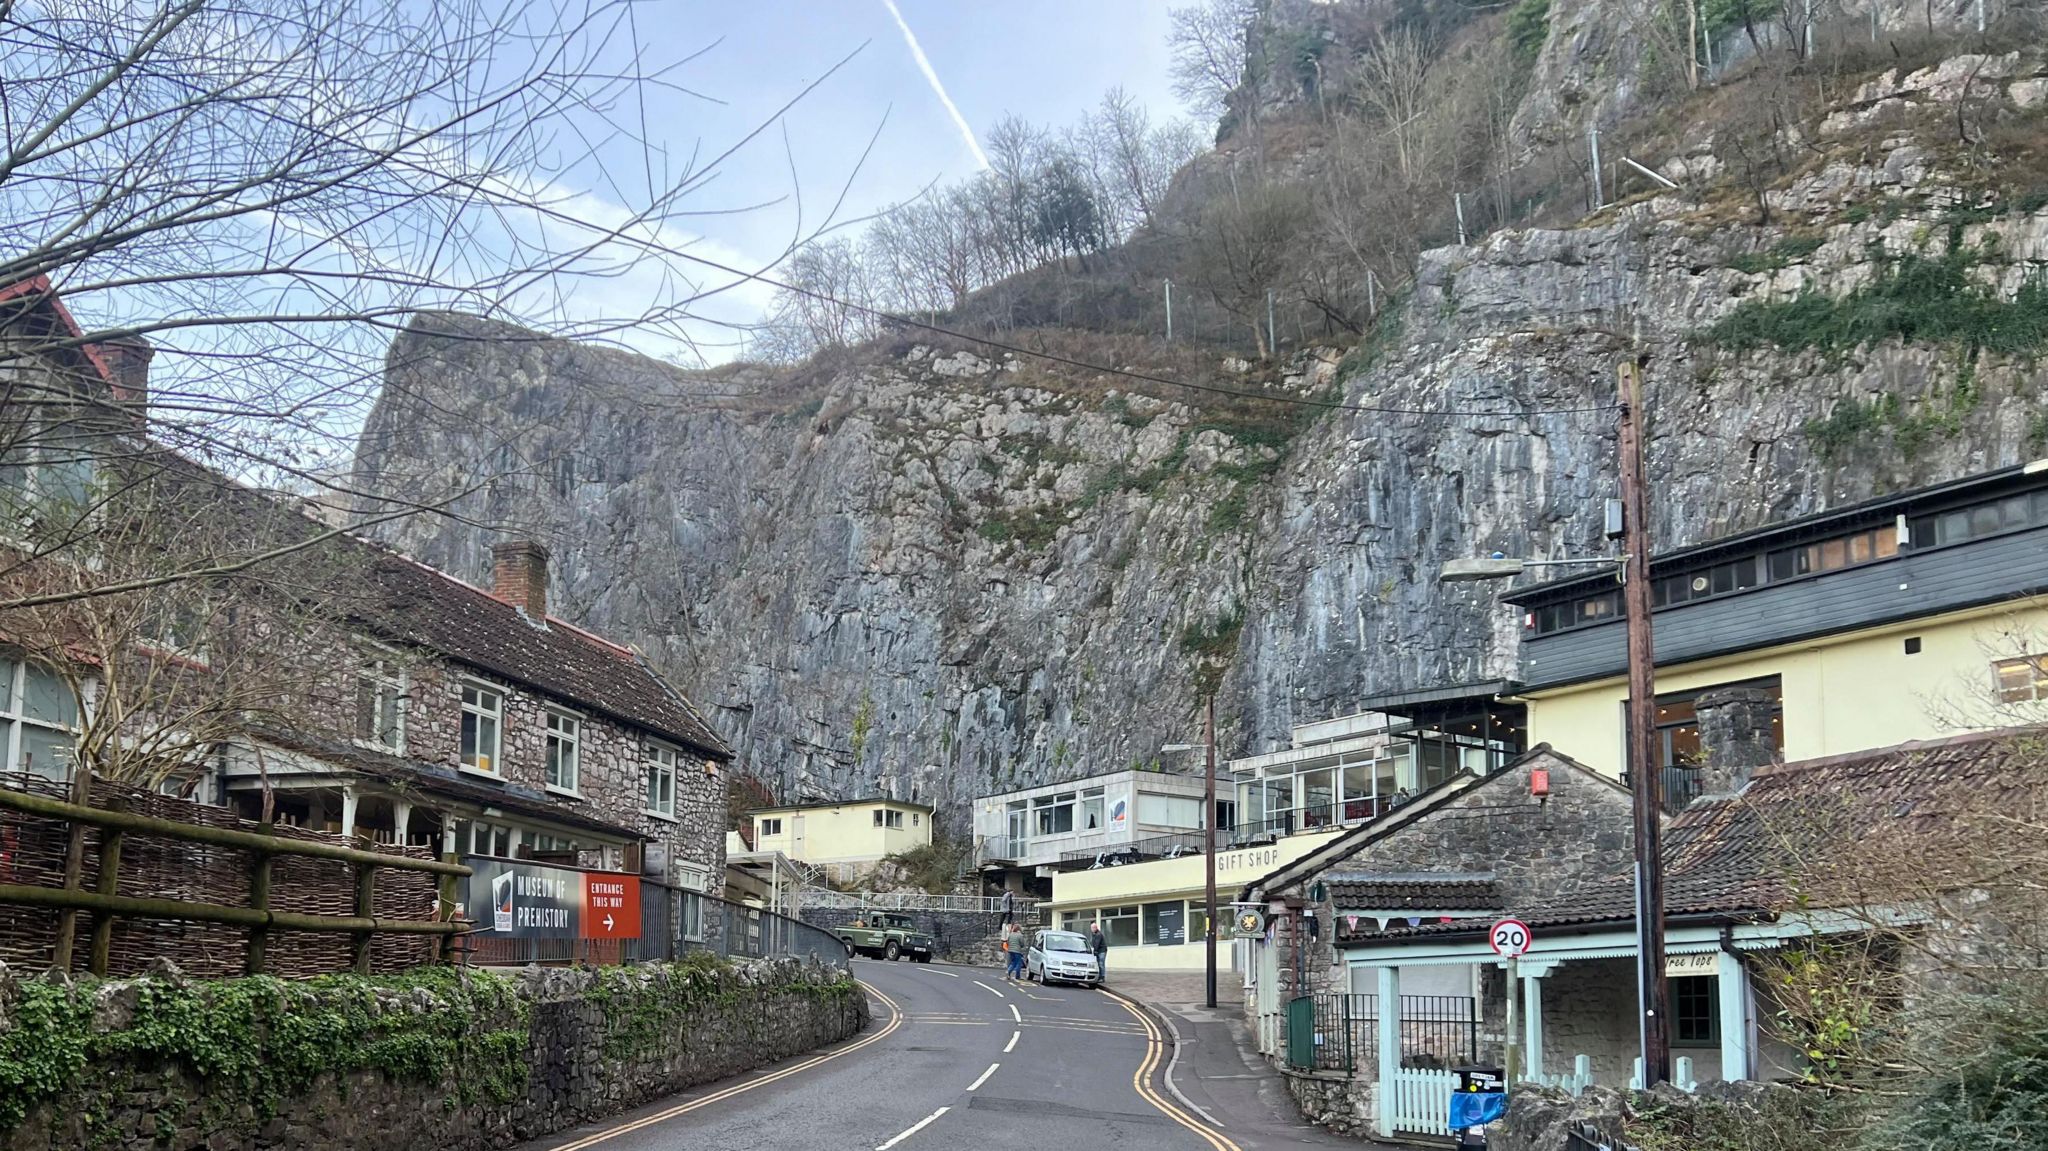 The road through Cheddar Gorge's cliffs with shops and homes near the road.